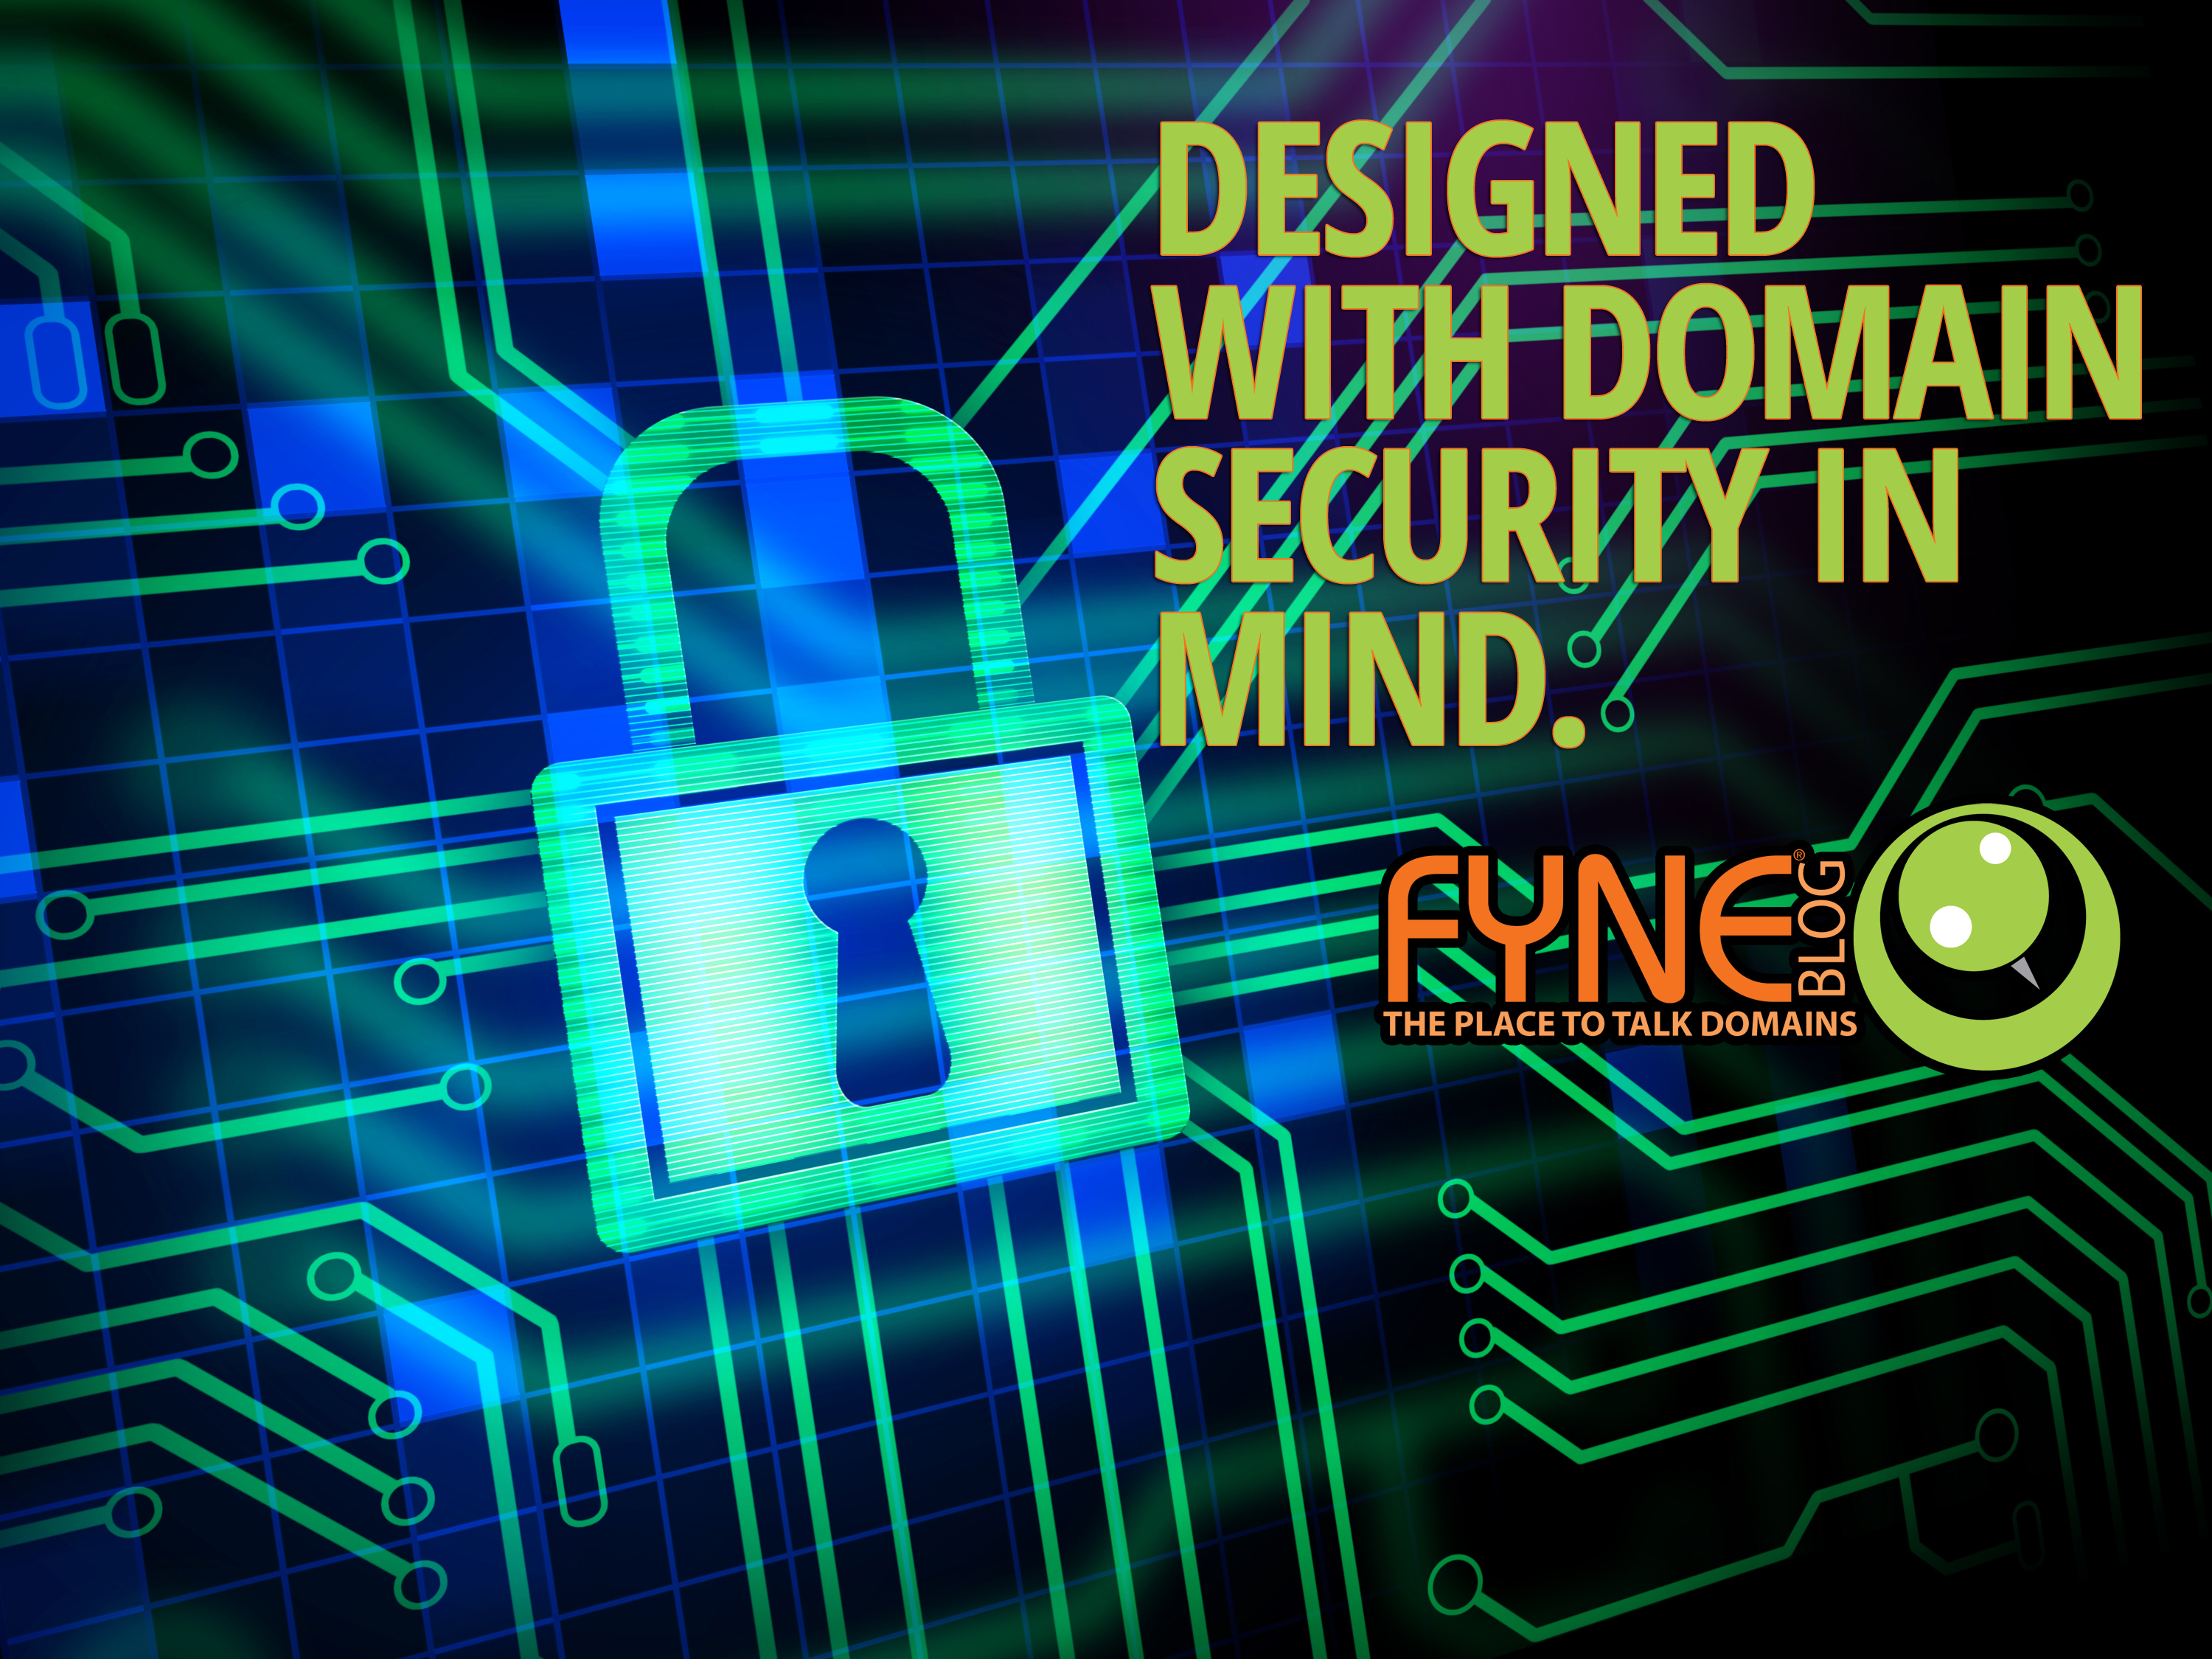 FYNE Blog - Domain Locked from Modifications